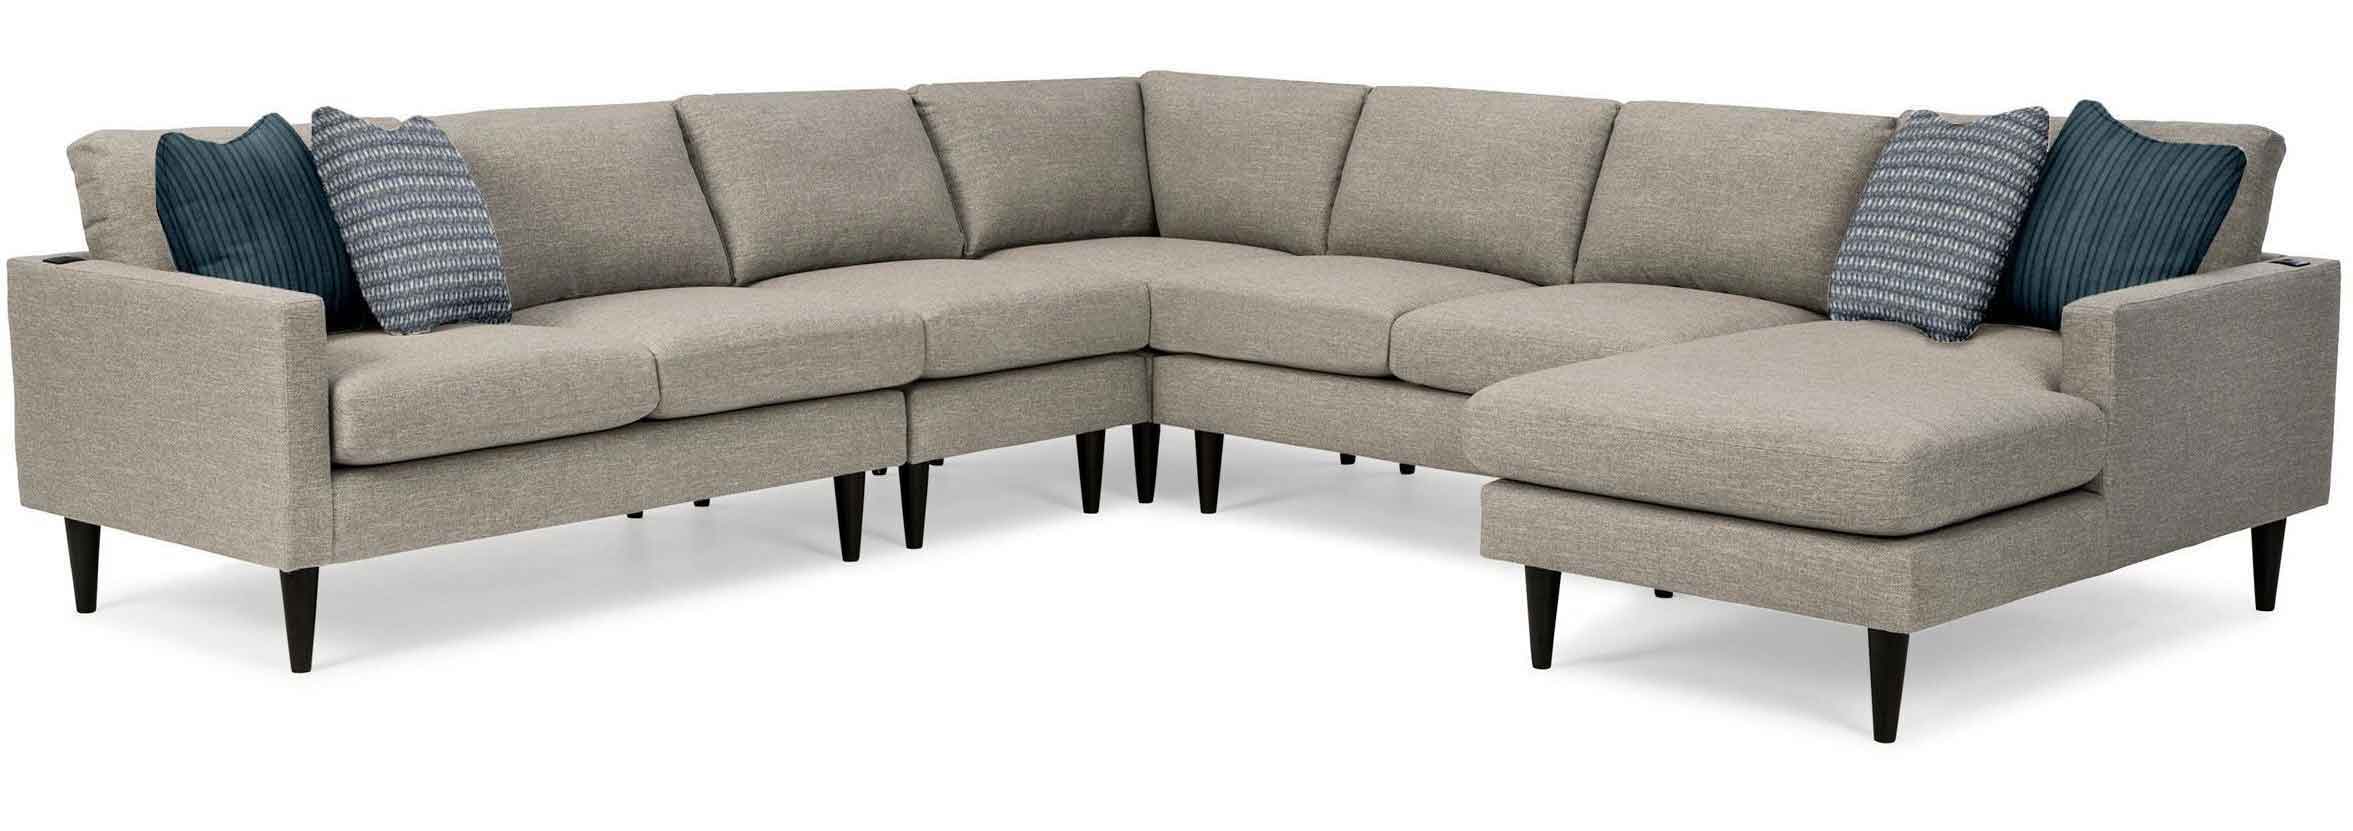 The Trafton Living Room Collection Product Review 